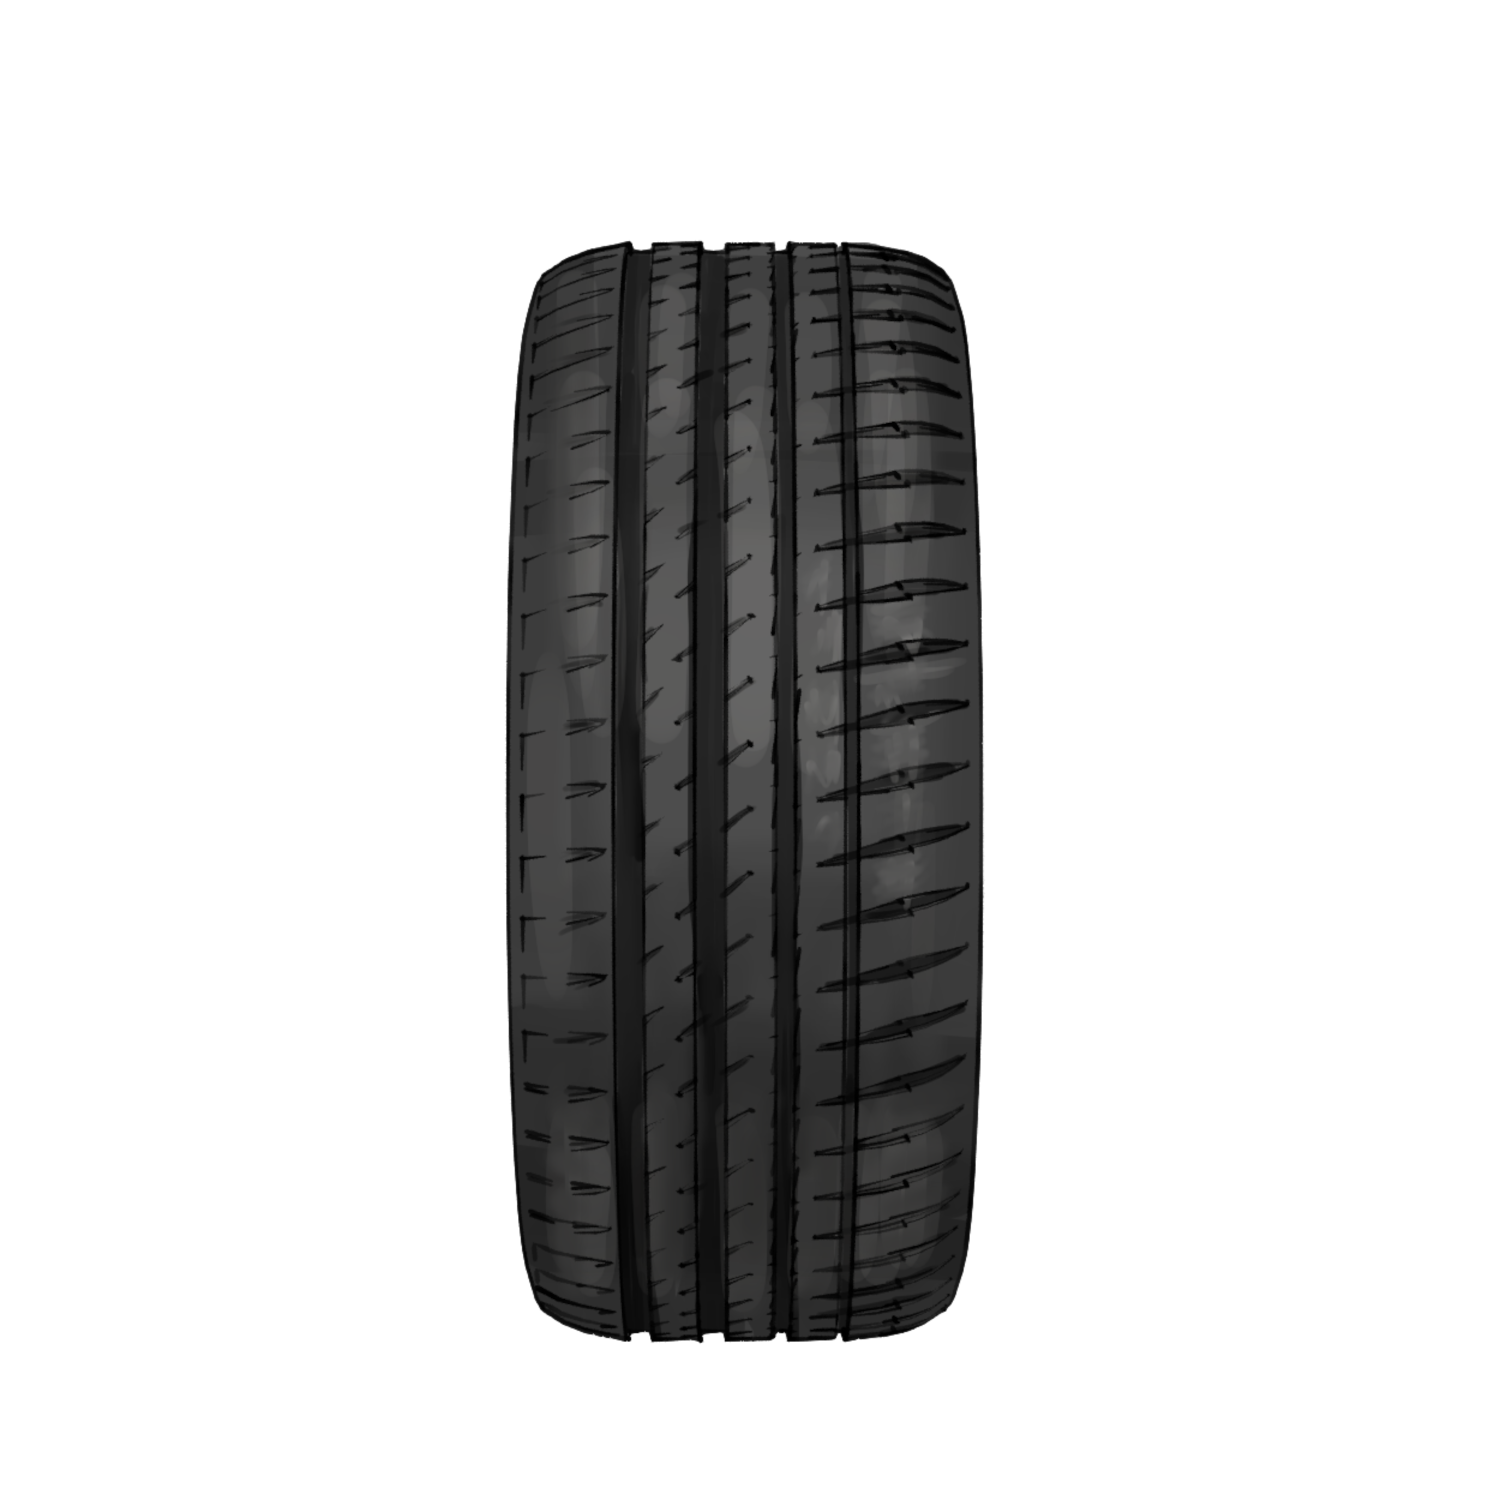  Product image 2 of the product “Yeti Beyond Tyre ”